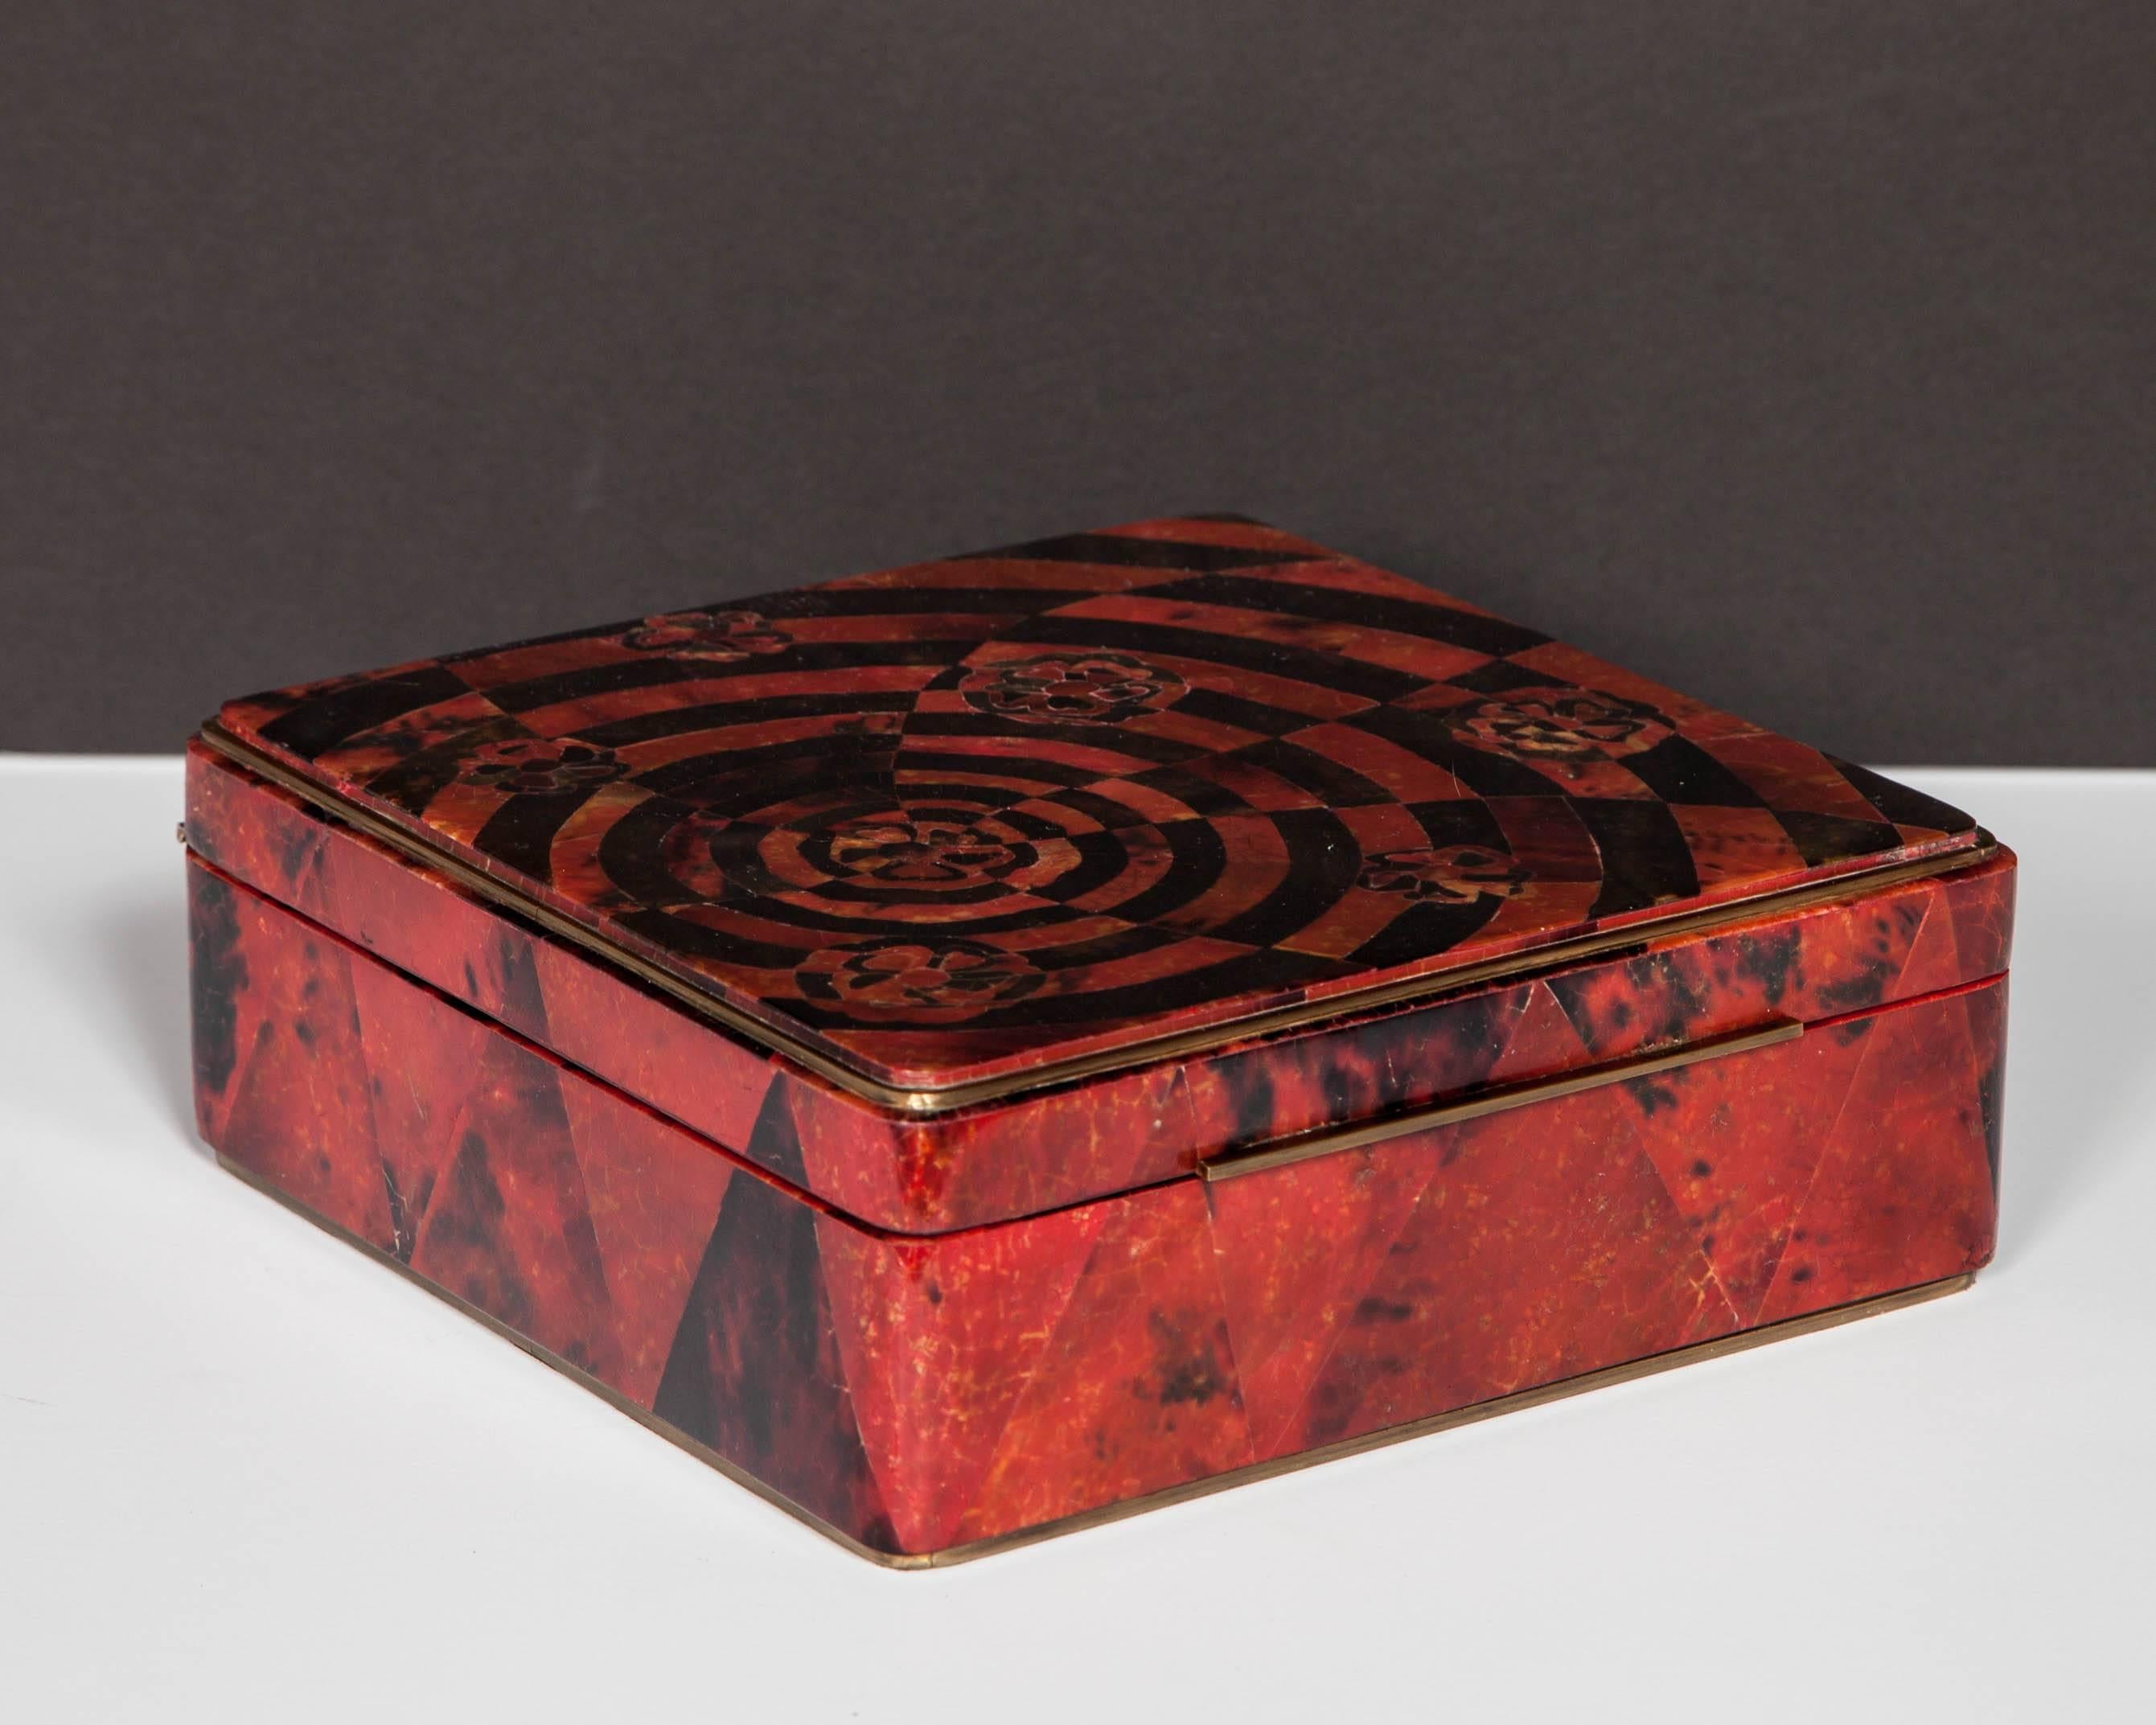 French Pen Shell Box in Ruby Red with Geometric Inlay Design